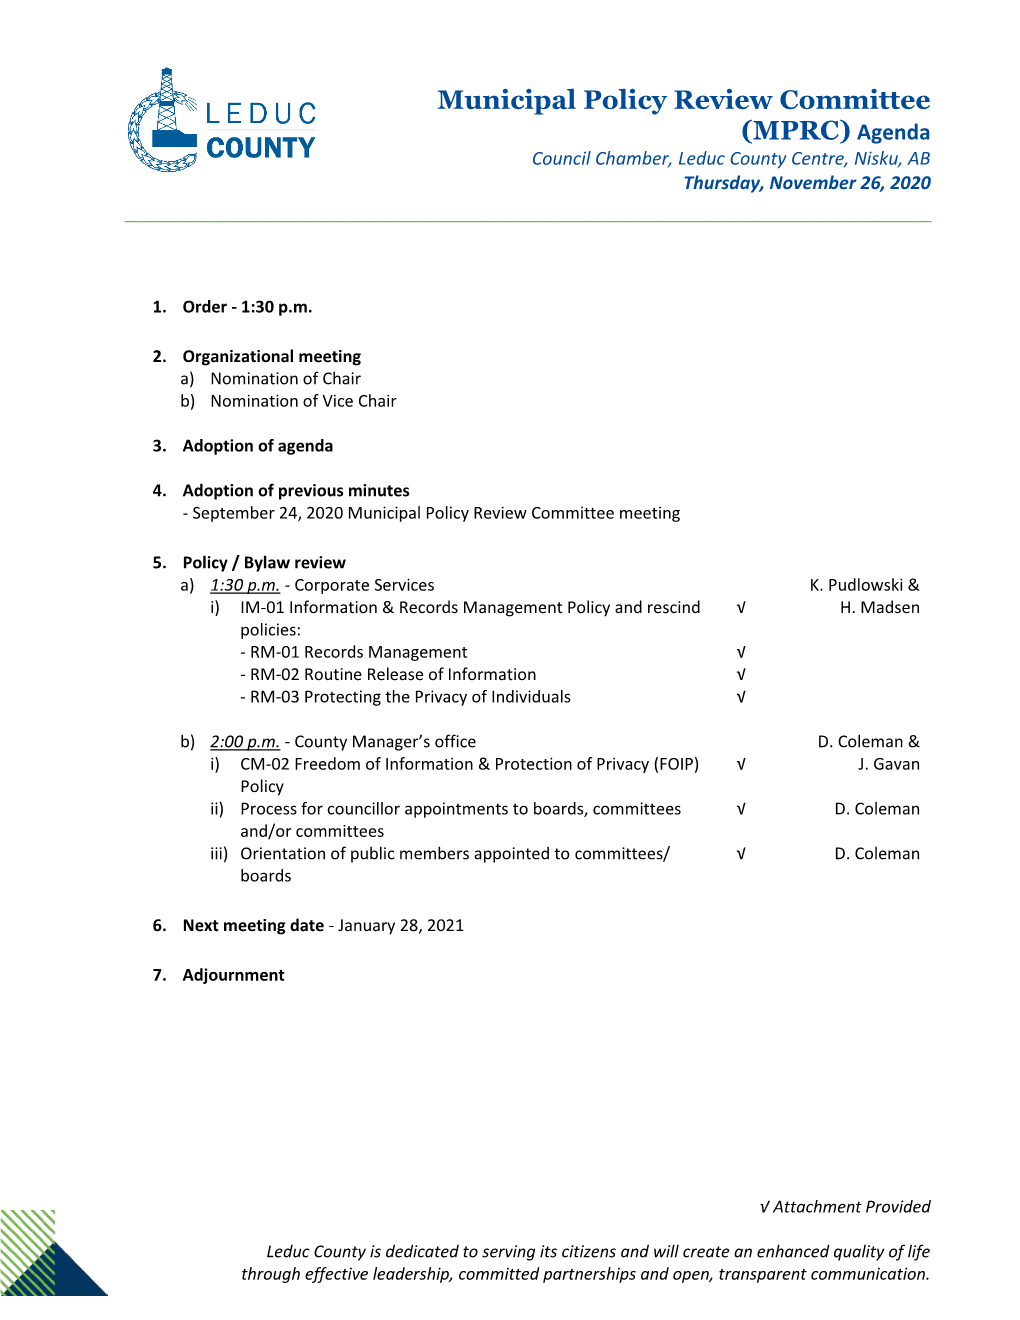 Nov. 26, 2020 Municipal Policy Review Committee Agenda